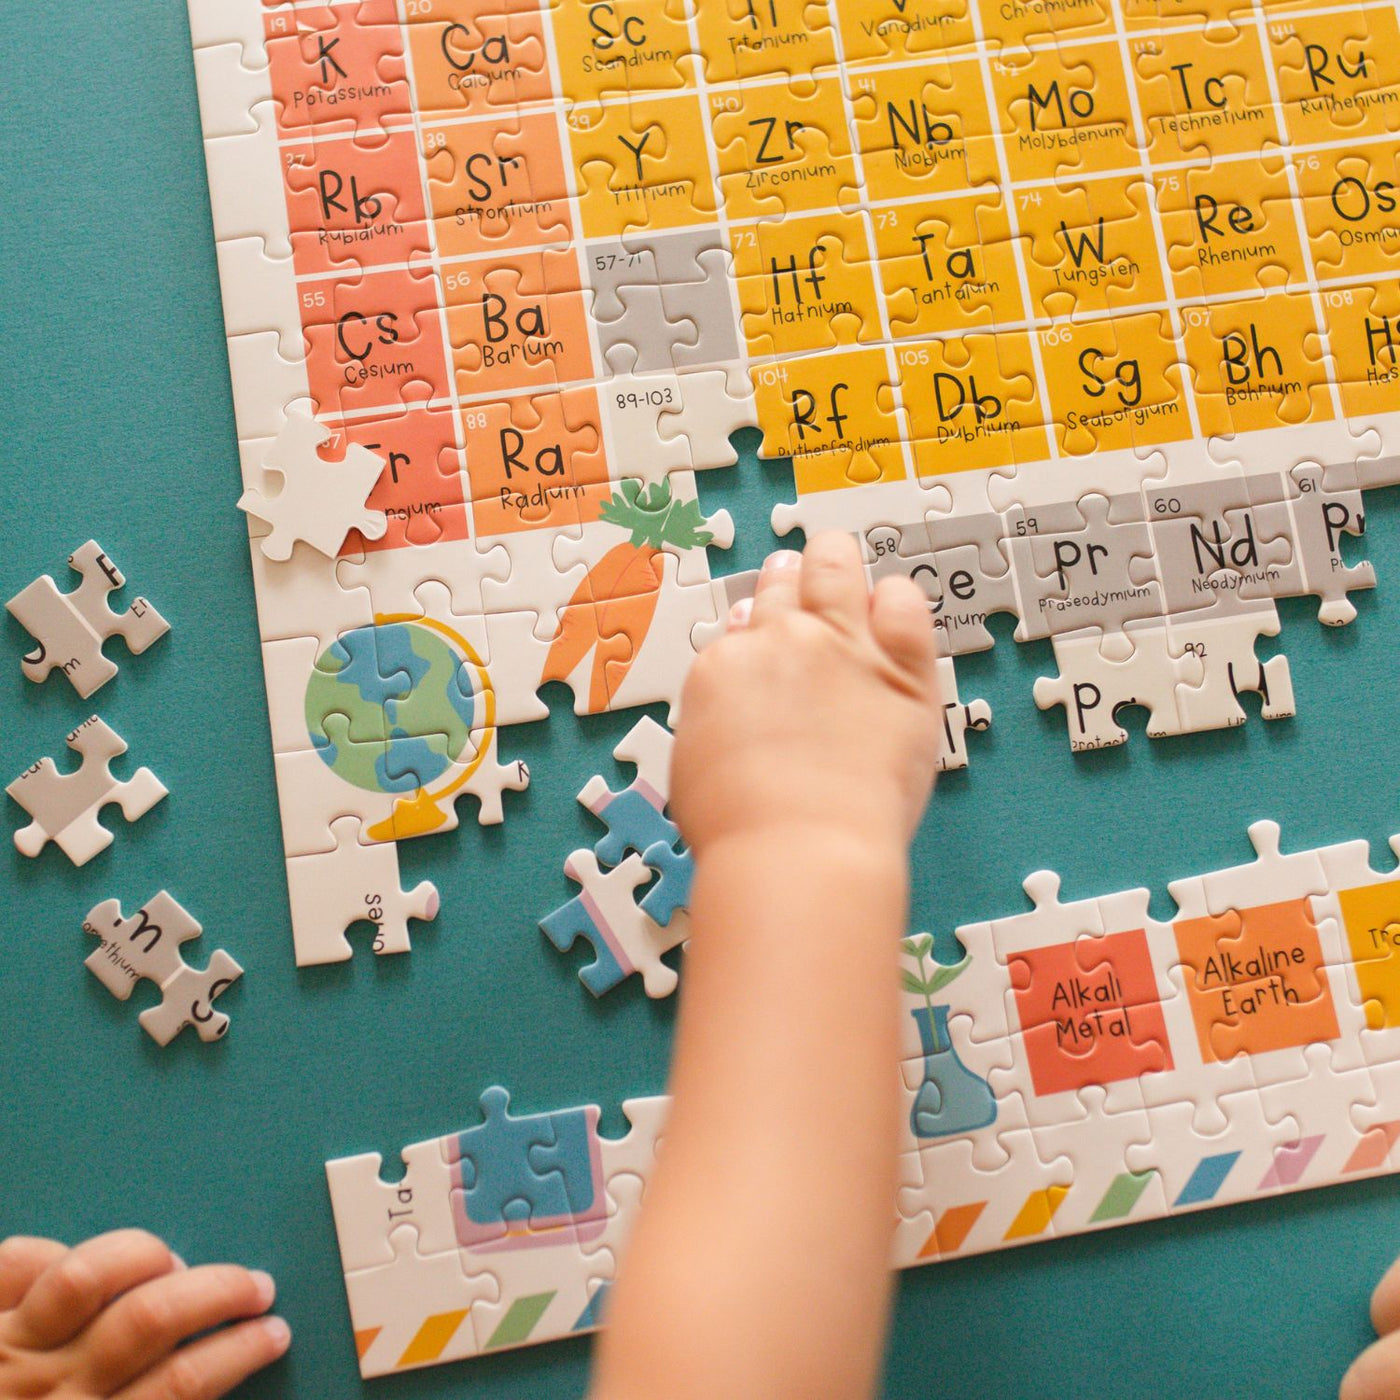 Periodic Table | 500 Piece Jigsaw Puzzle